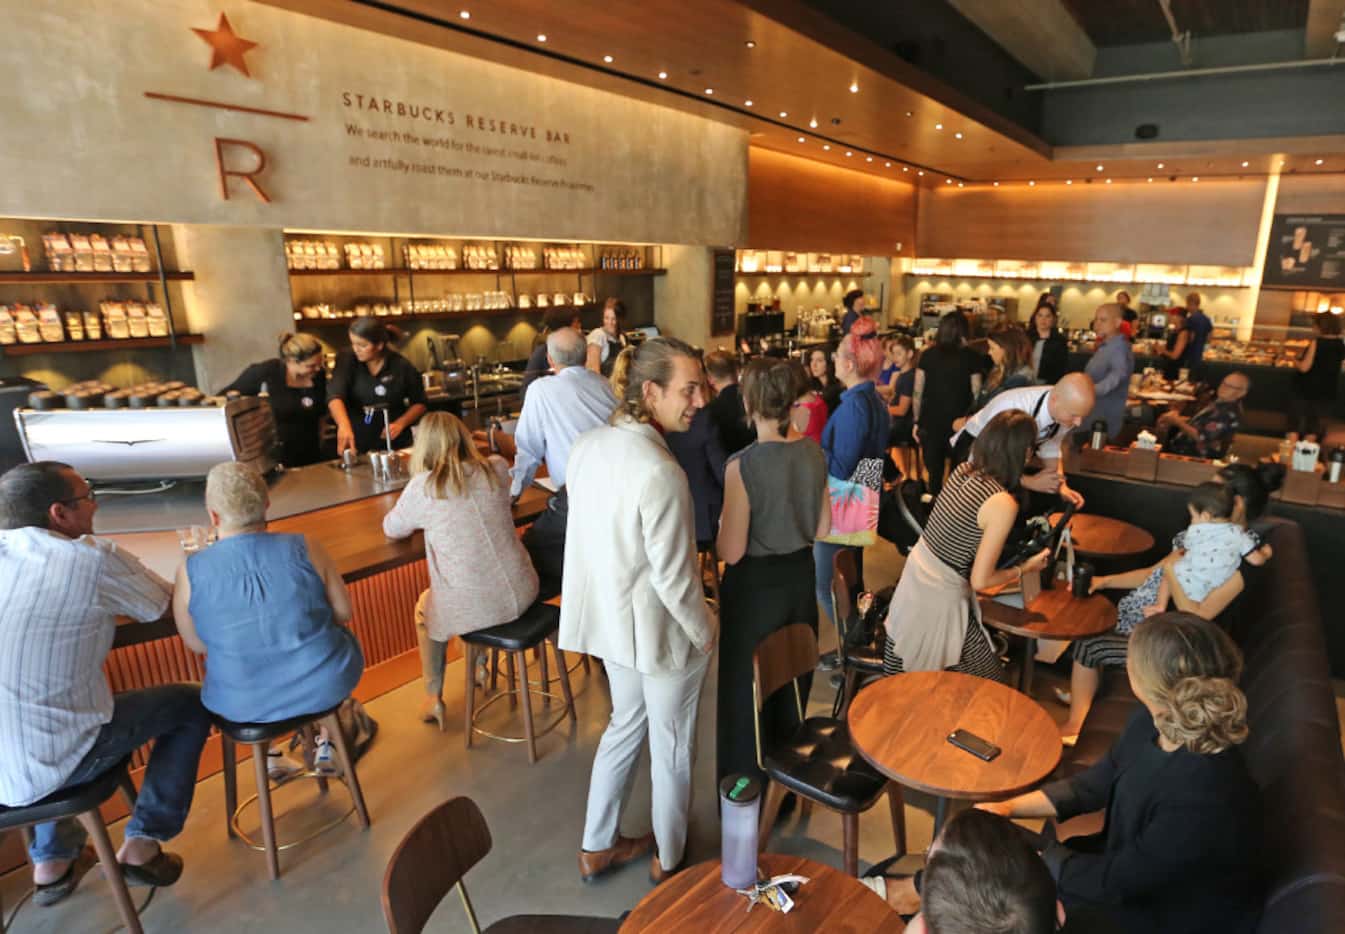 The Starbucks Reserve Bar drew a crowd on opening day. 